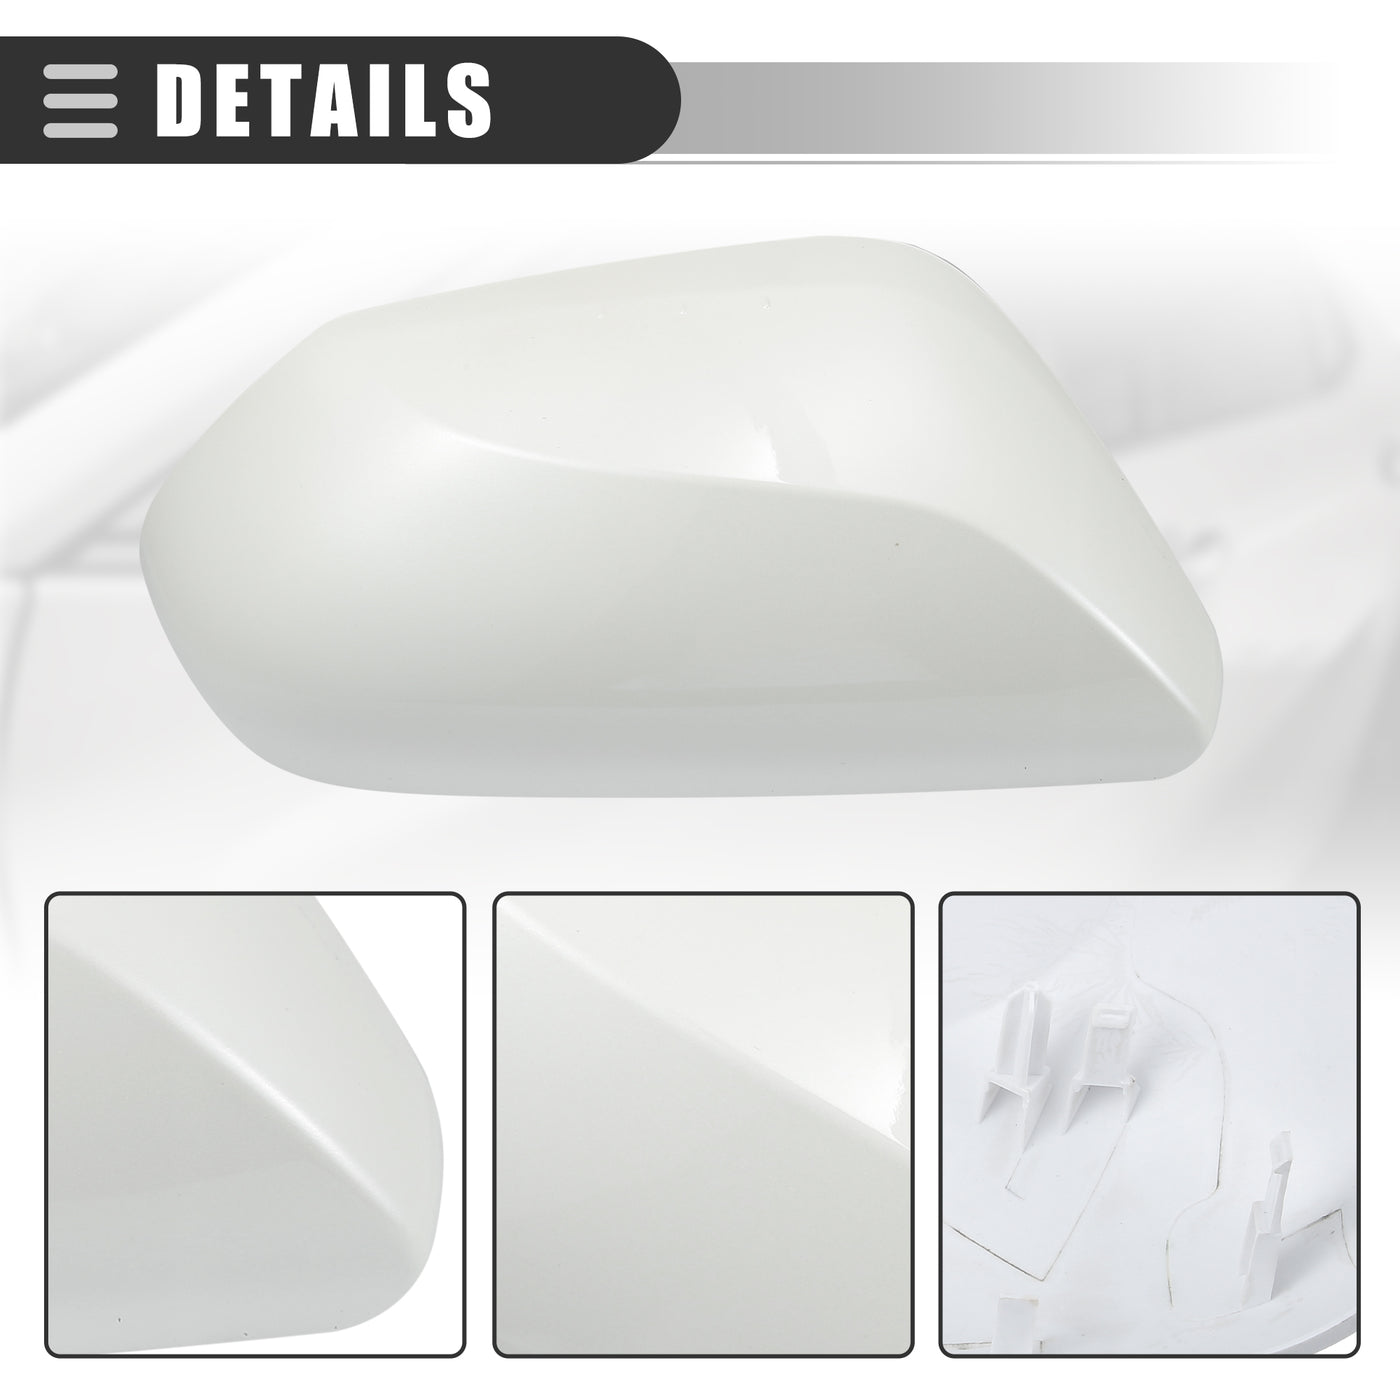 Motoforti Right Side Mirror Cover Cap, Rearview Mirror Cover Cap, for Toyota Camry 2.5L L4 2018-2023, ABS, 87915-06130, White